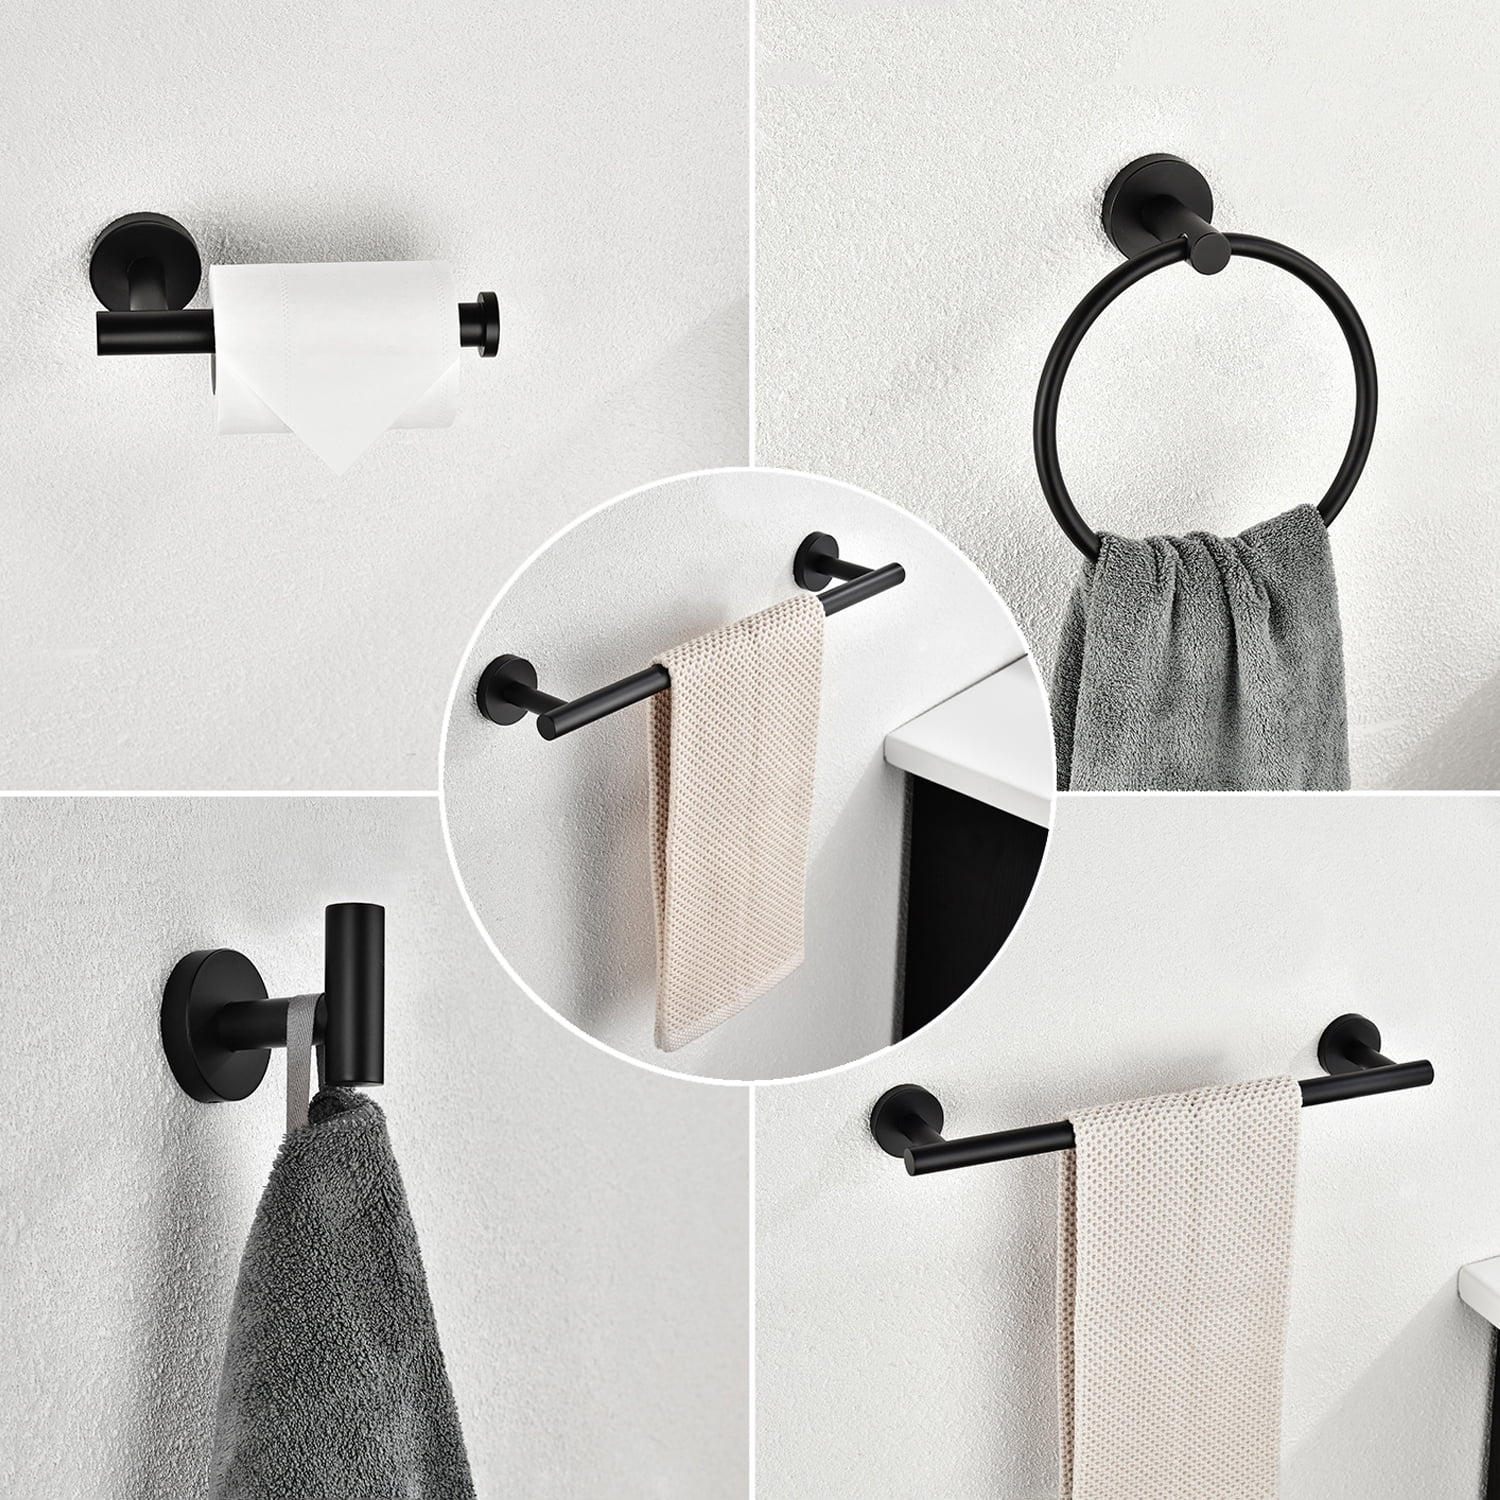 Details about   6pcs Bathroom Accessories Set Stainless steel Robe Hook Paper Holder Towel Rack 